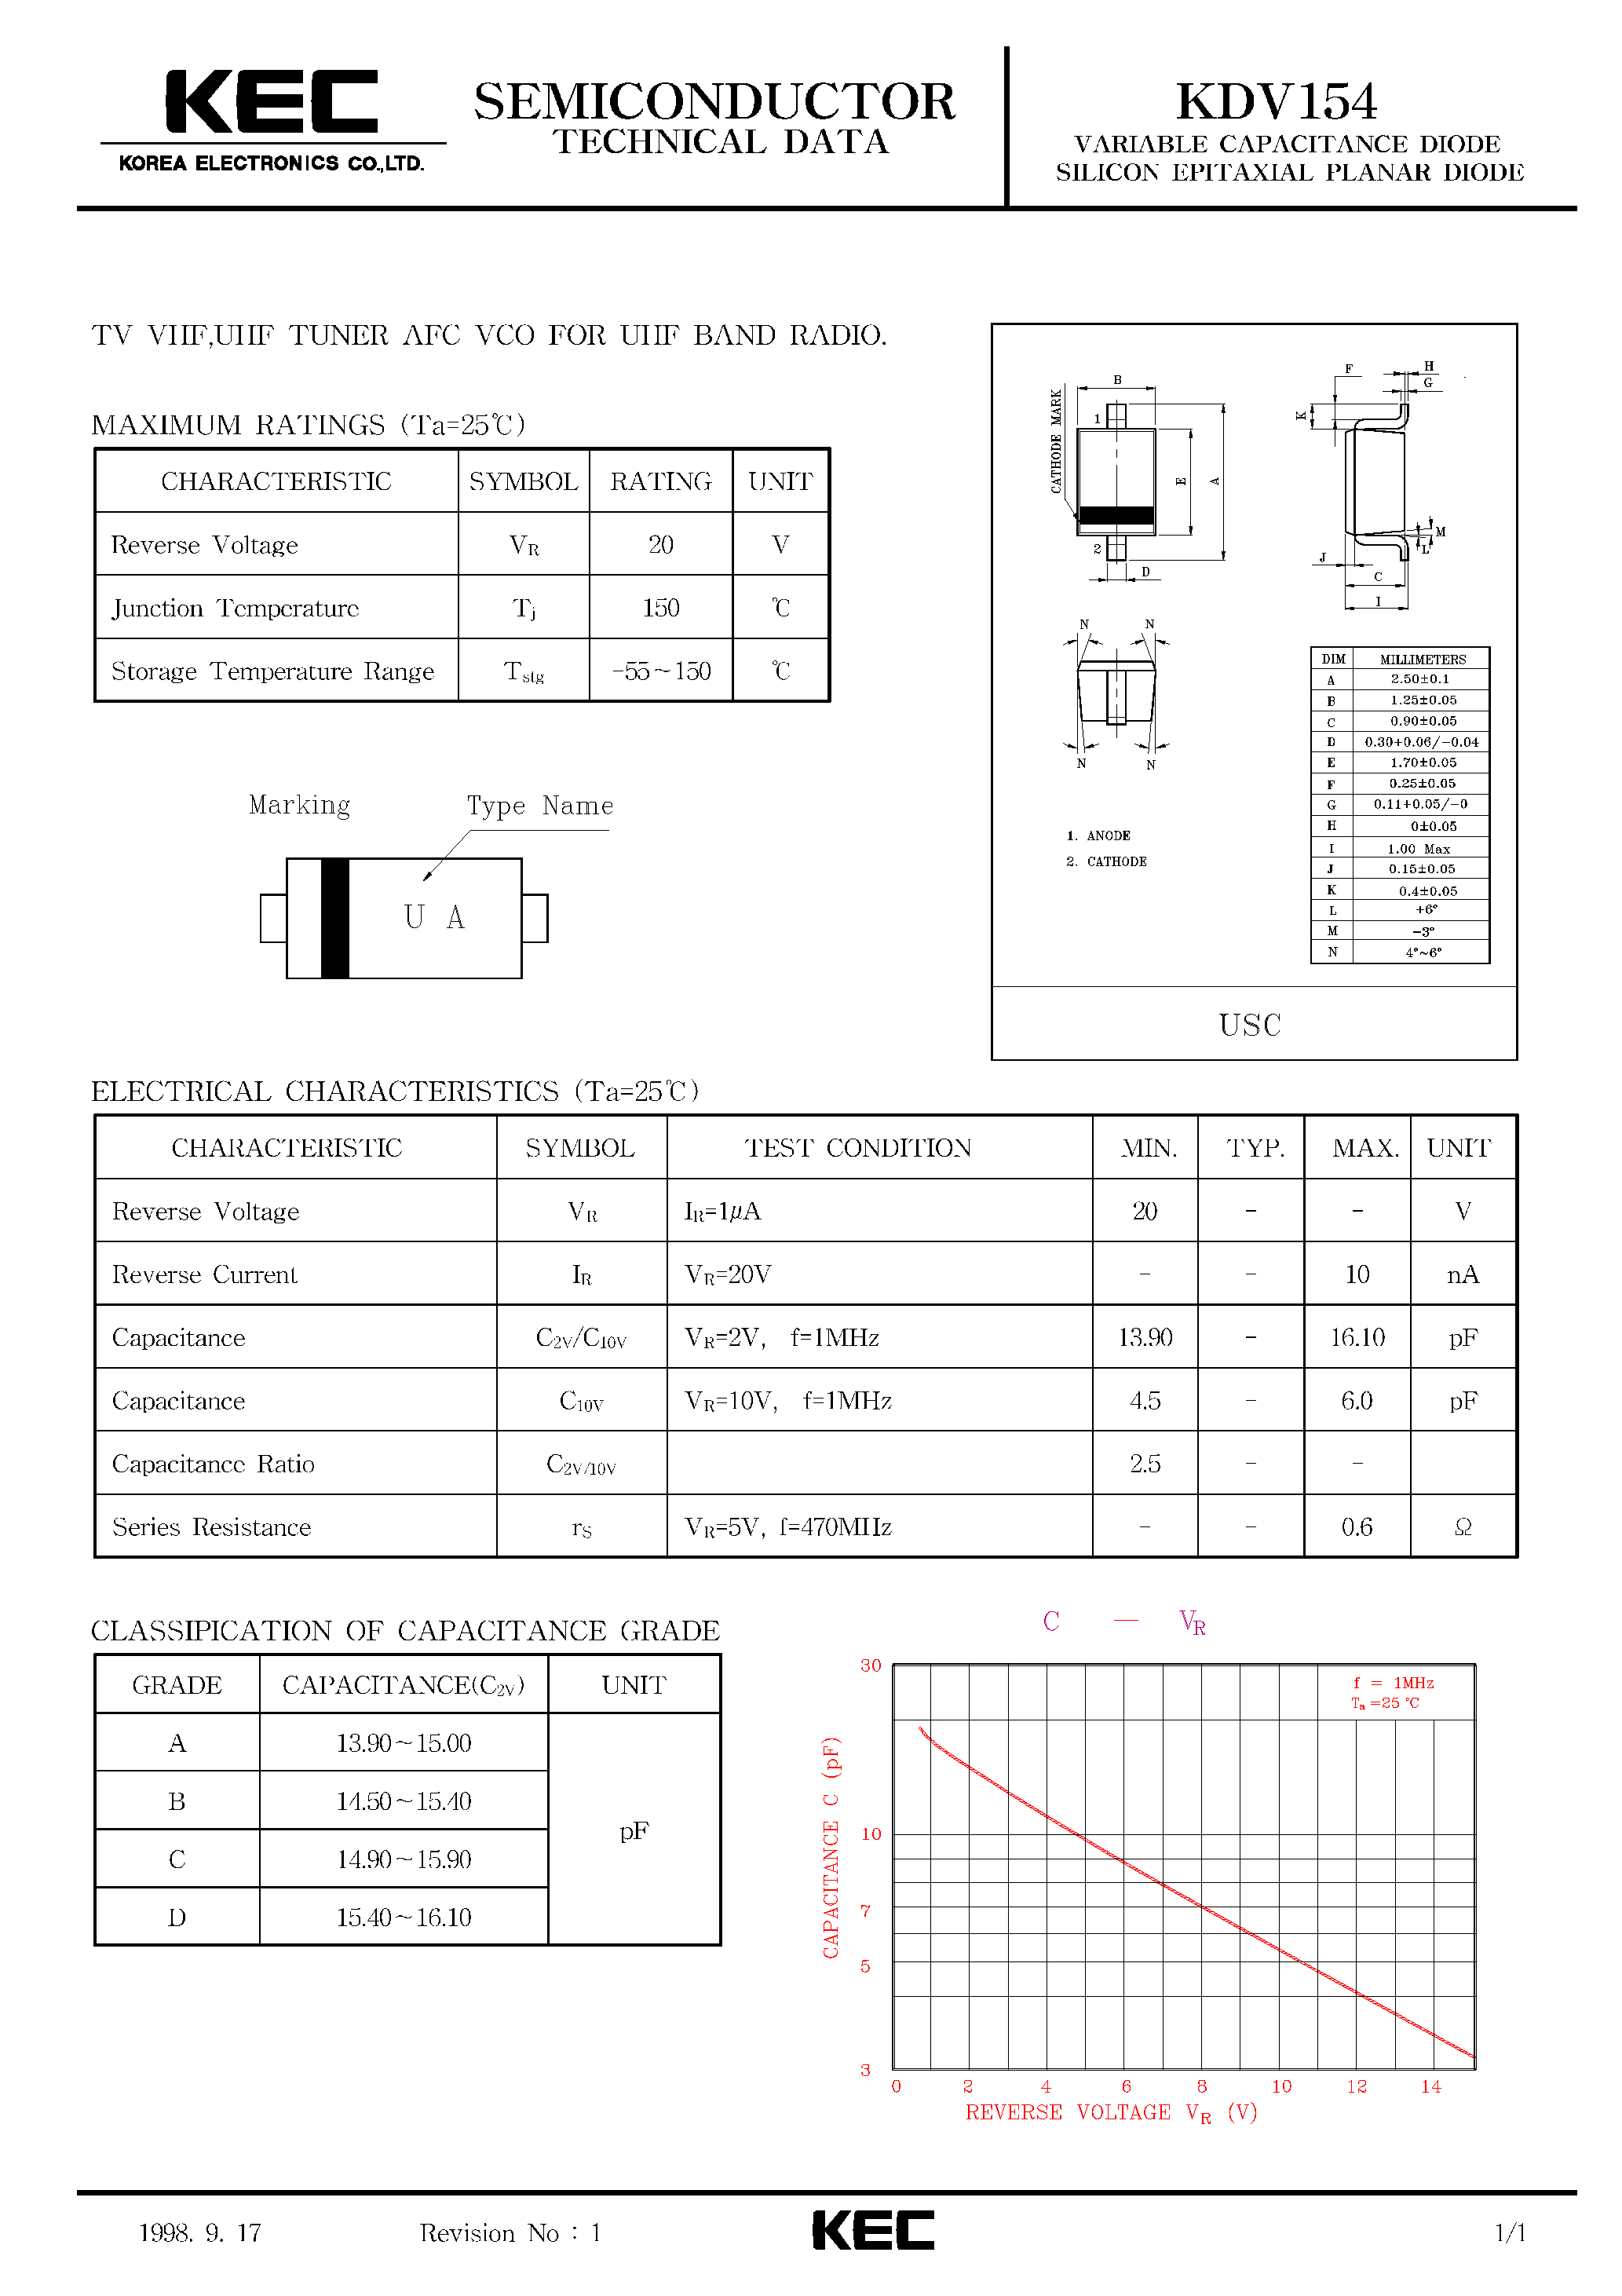 Datasheet KDV154 - VARIABLE CAPACITANCE DIODE SILICON EPITAXIAL PLANAR DIODE(TV VHF/UHF TUNER AFC VCO FOR UHF BAND RADIO) page 1